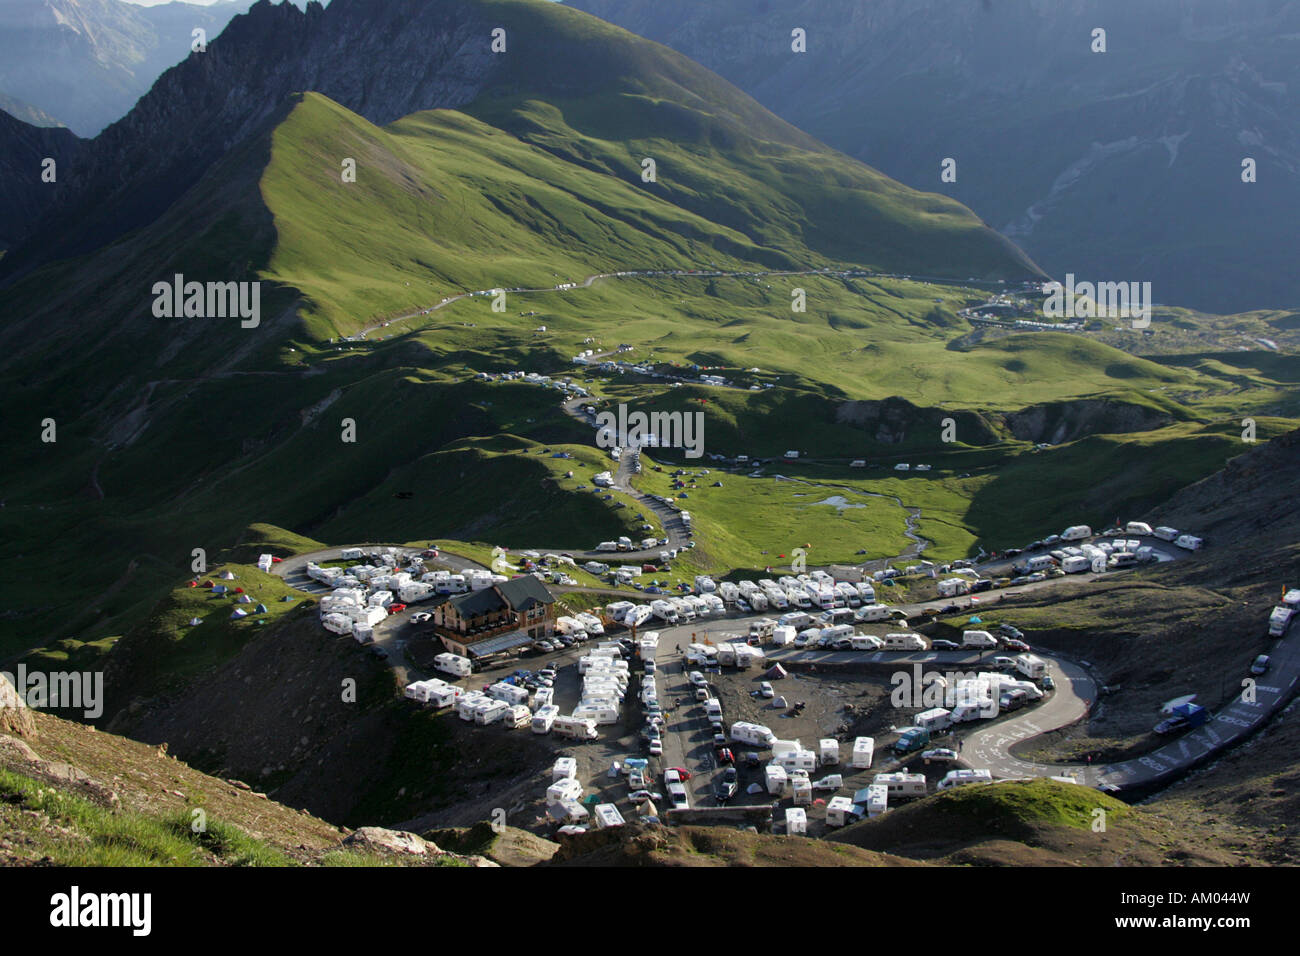 Col de Galibier mountain pass, during a stage of the Tour de France Stock Photo